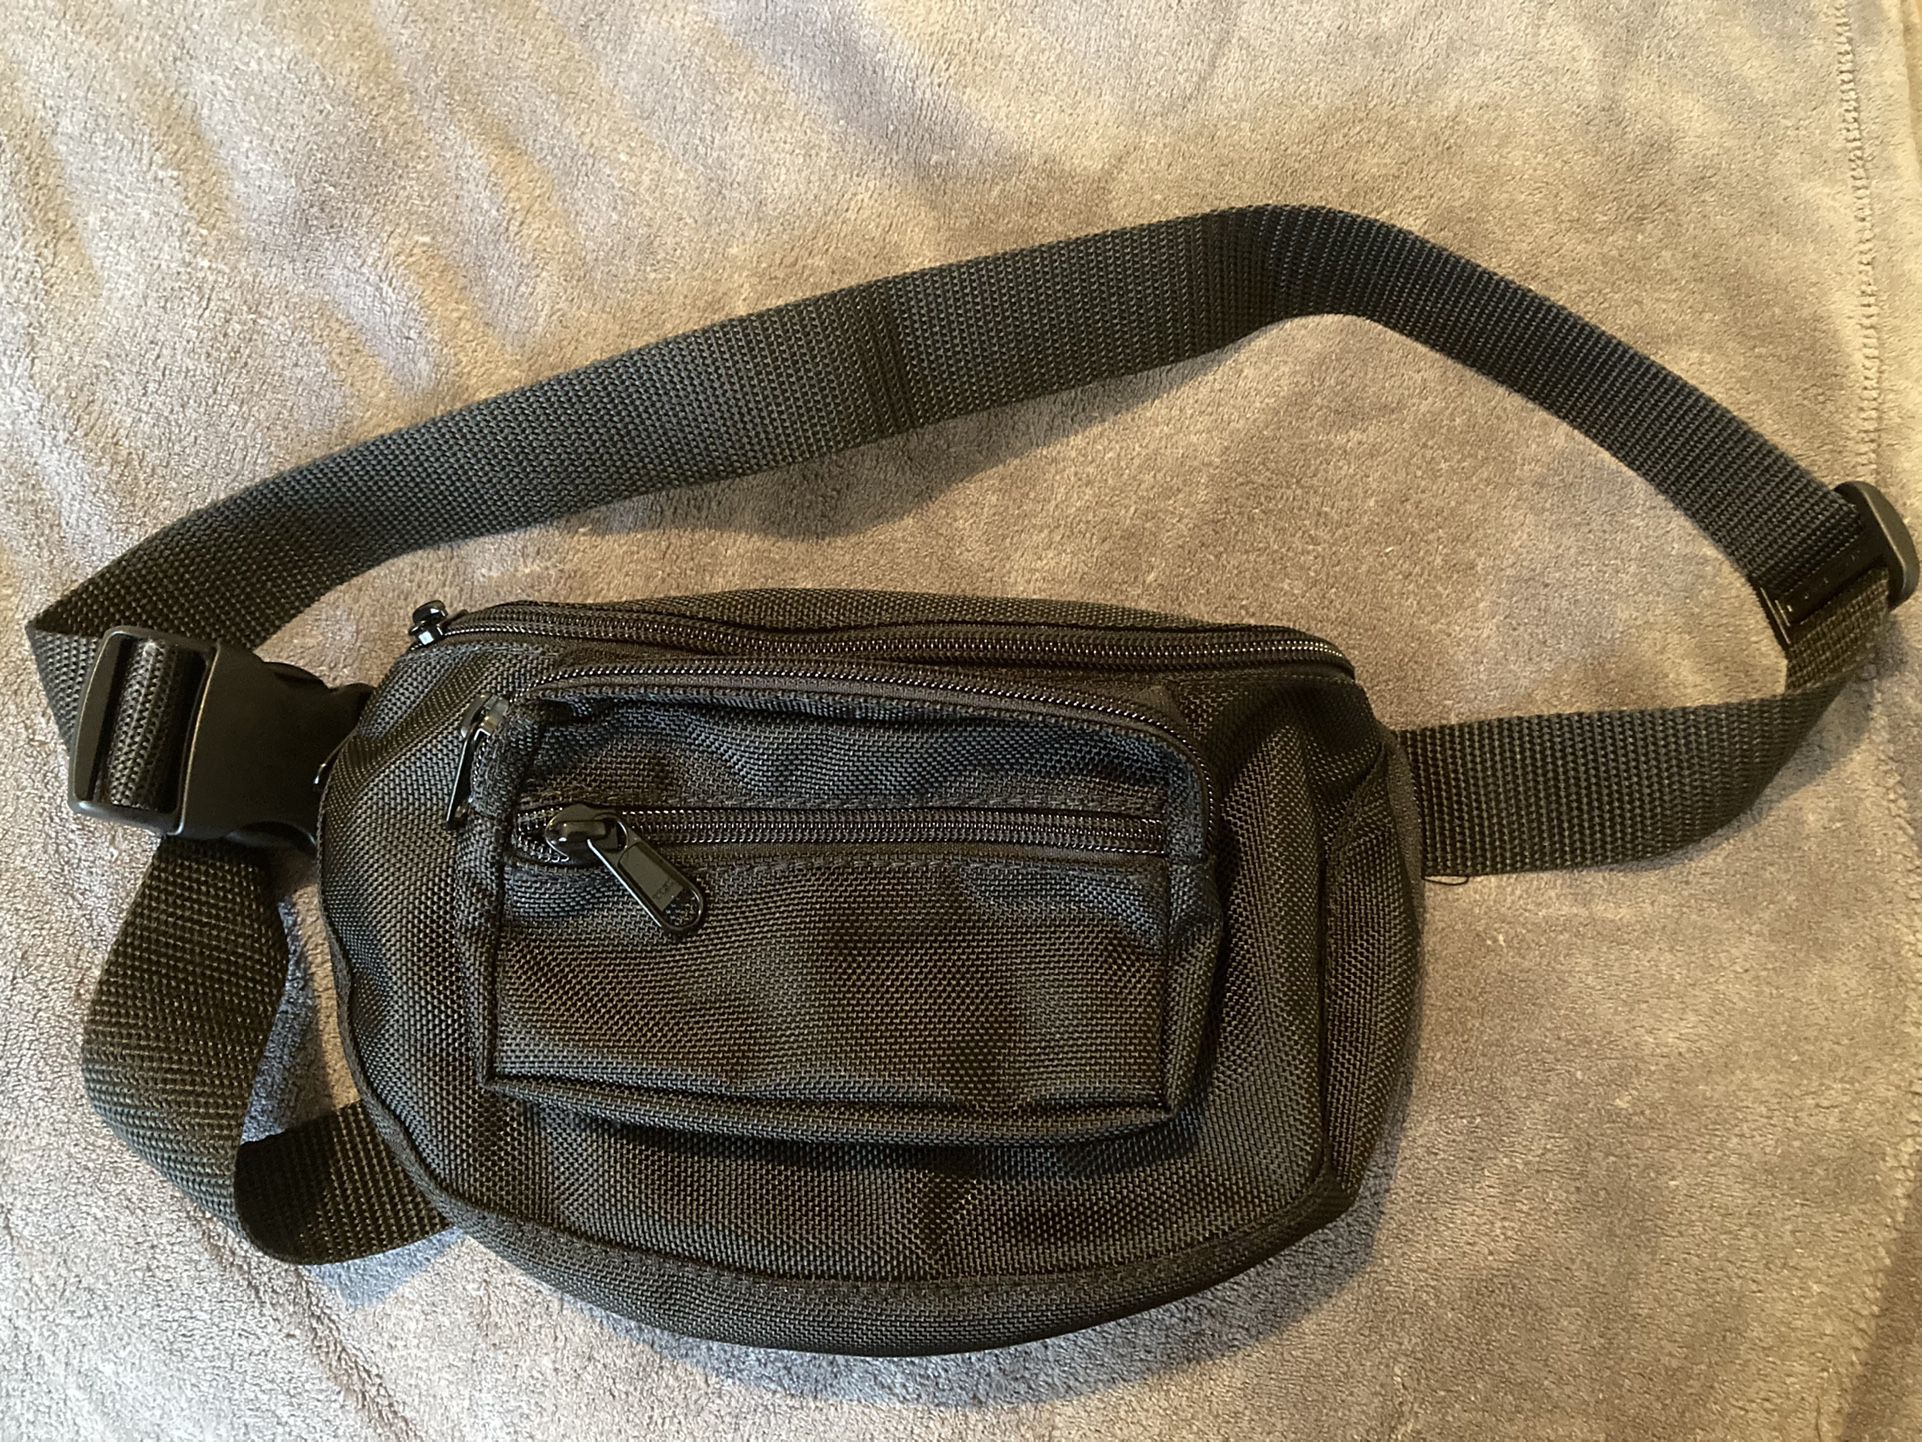 EDC/Concealed Carry/Hiking Fanny Pack